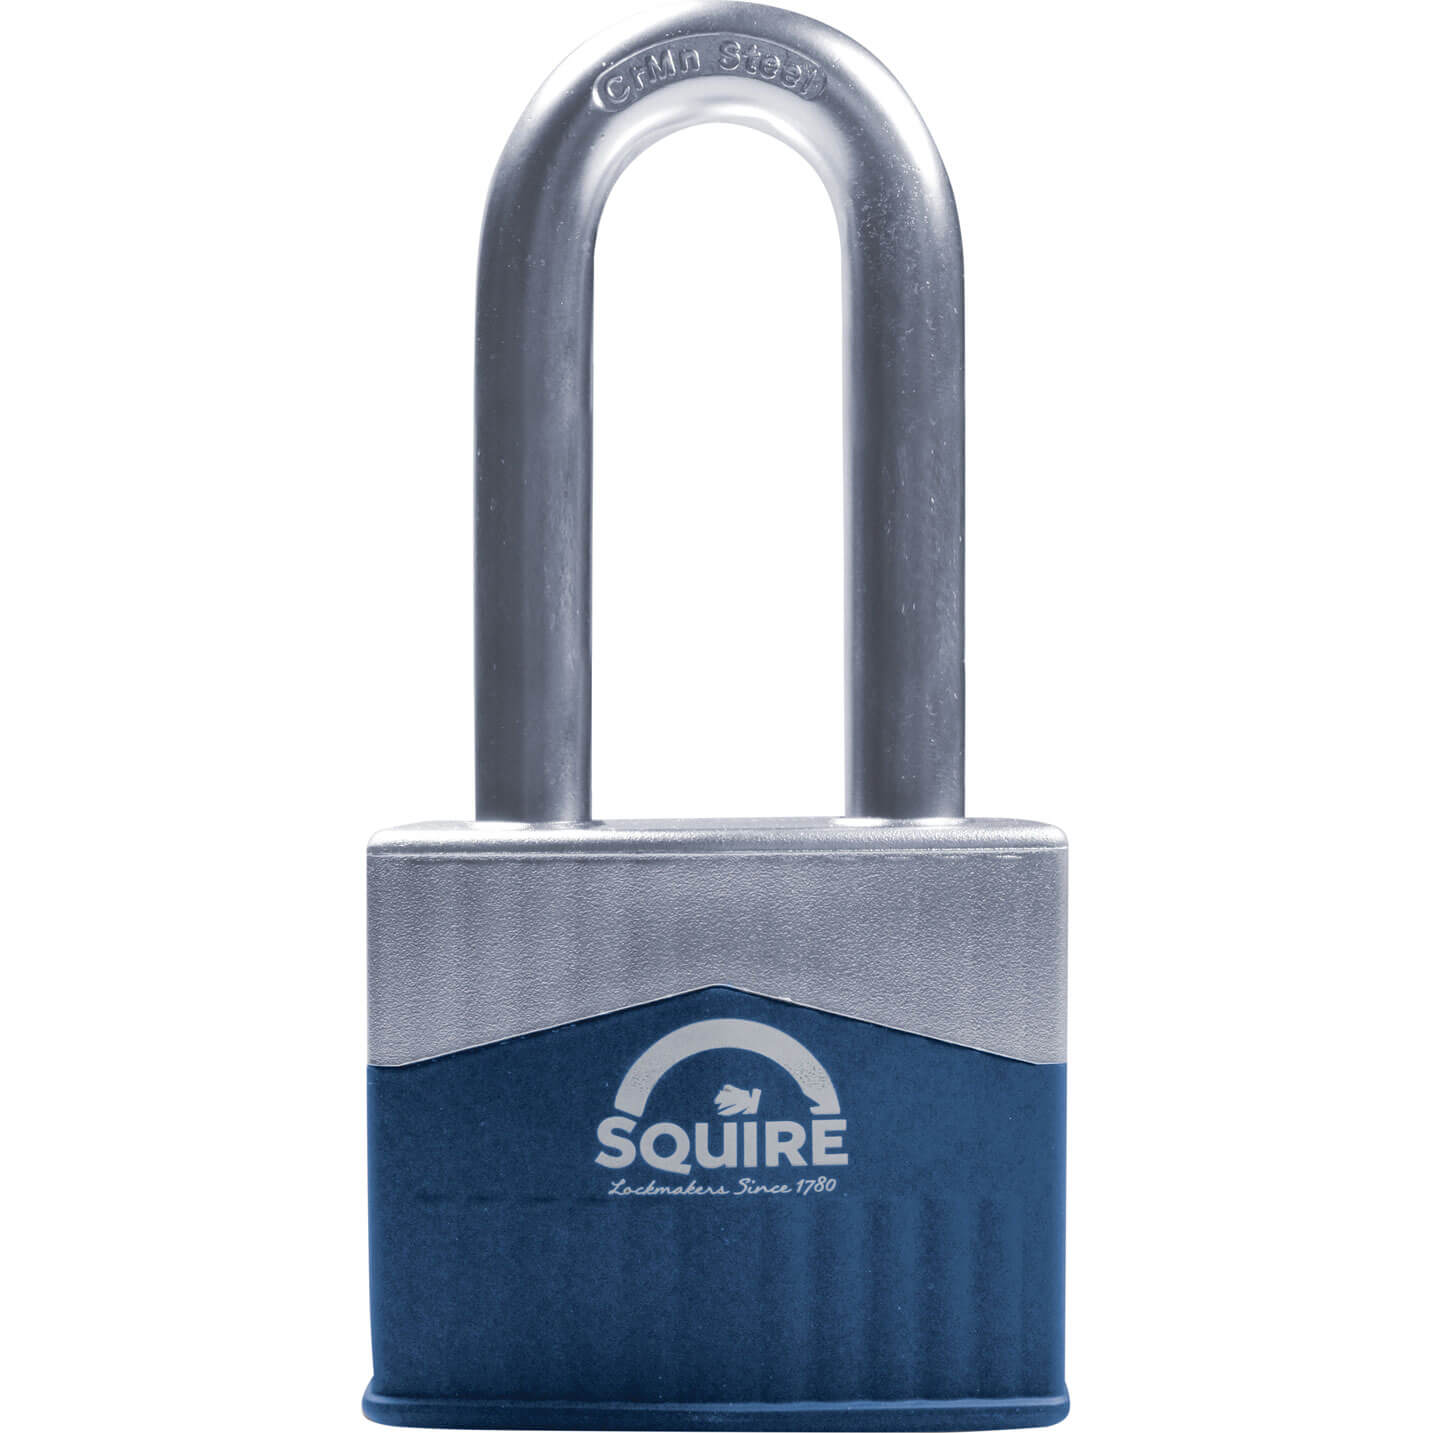 Henry Squire Warrior High Security Shackle Padlock 65mm Long